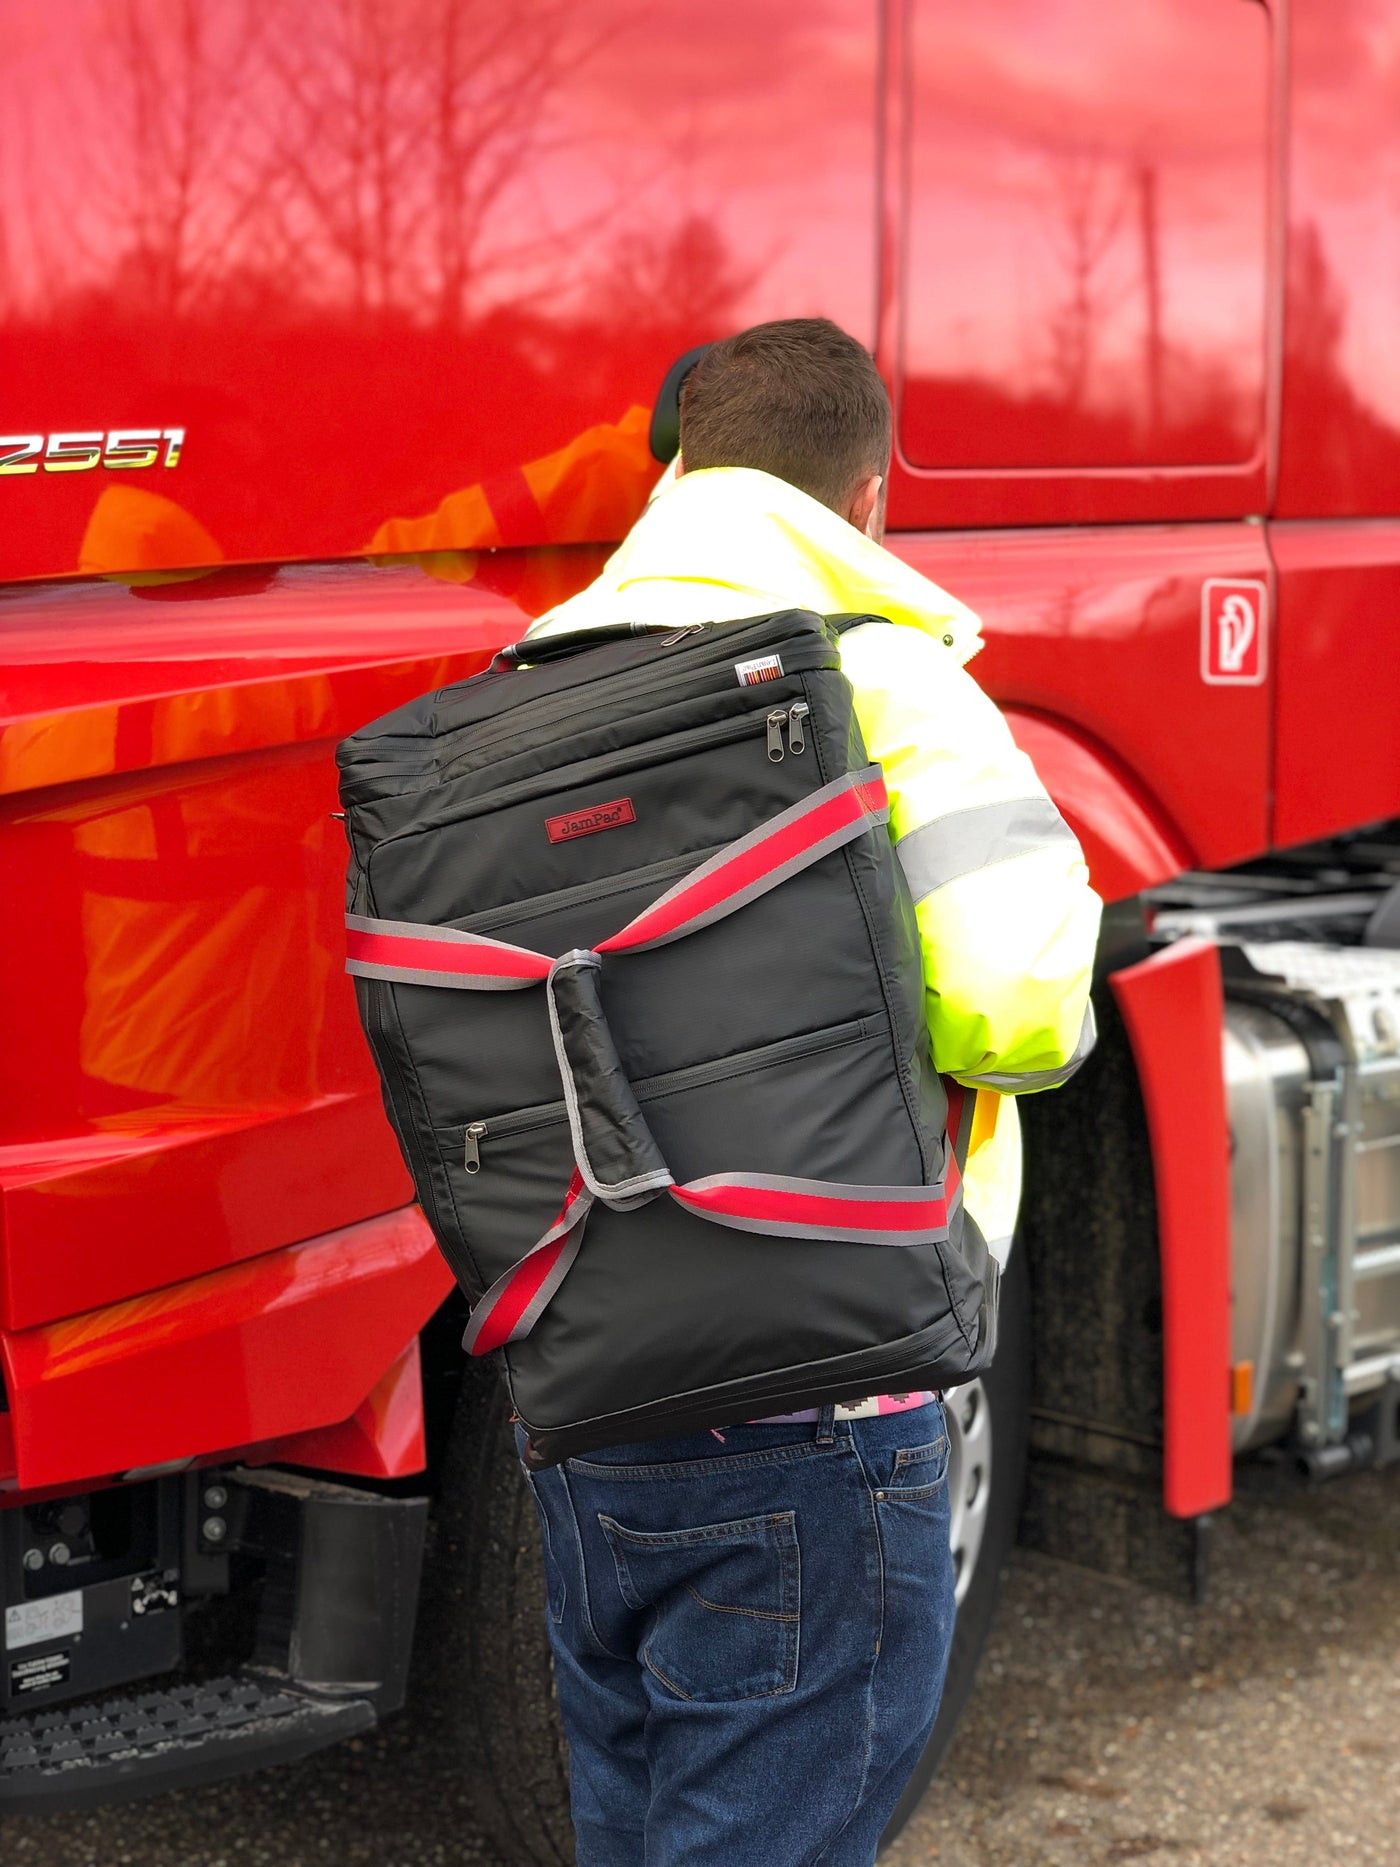 Complete Truckers Luggage System Including HangPac, MOrg, SOrg, VacPAc - All You Need!